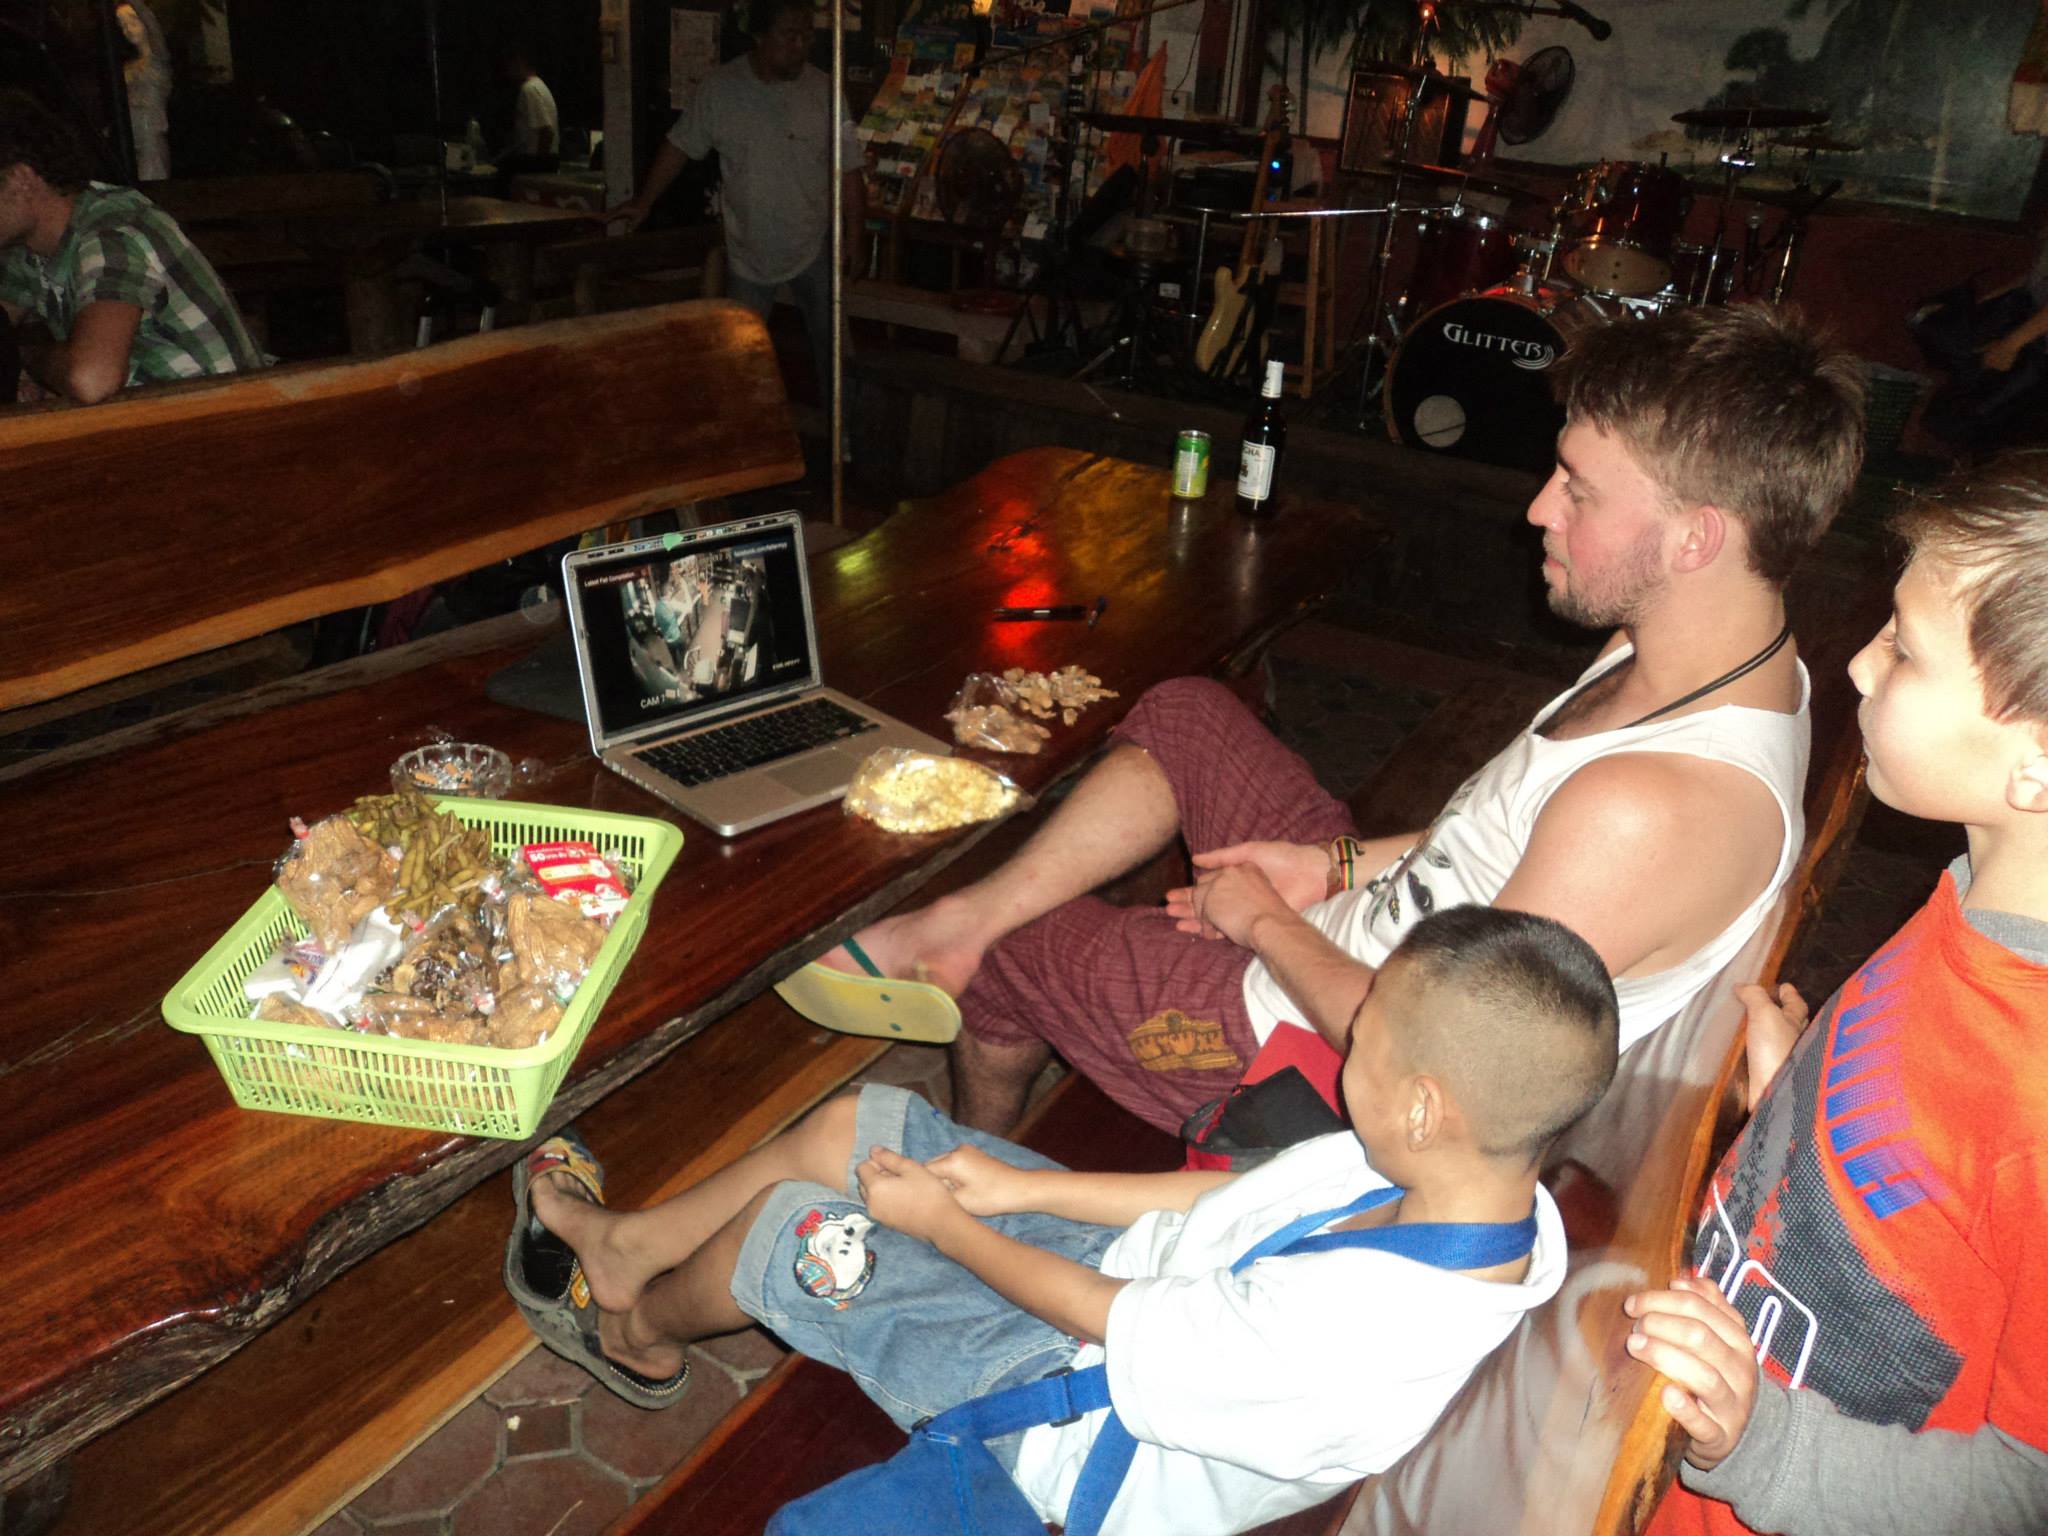 Mike Neumegen and two boys watching a laptop on a table with food